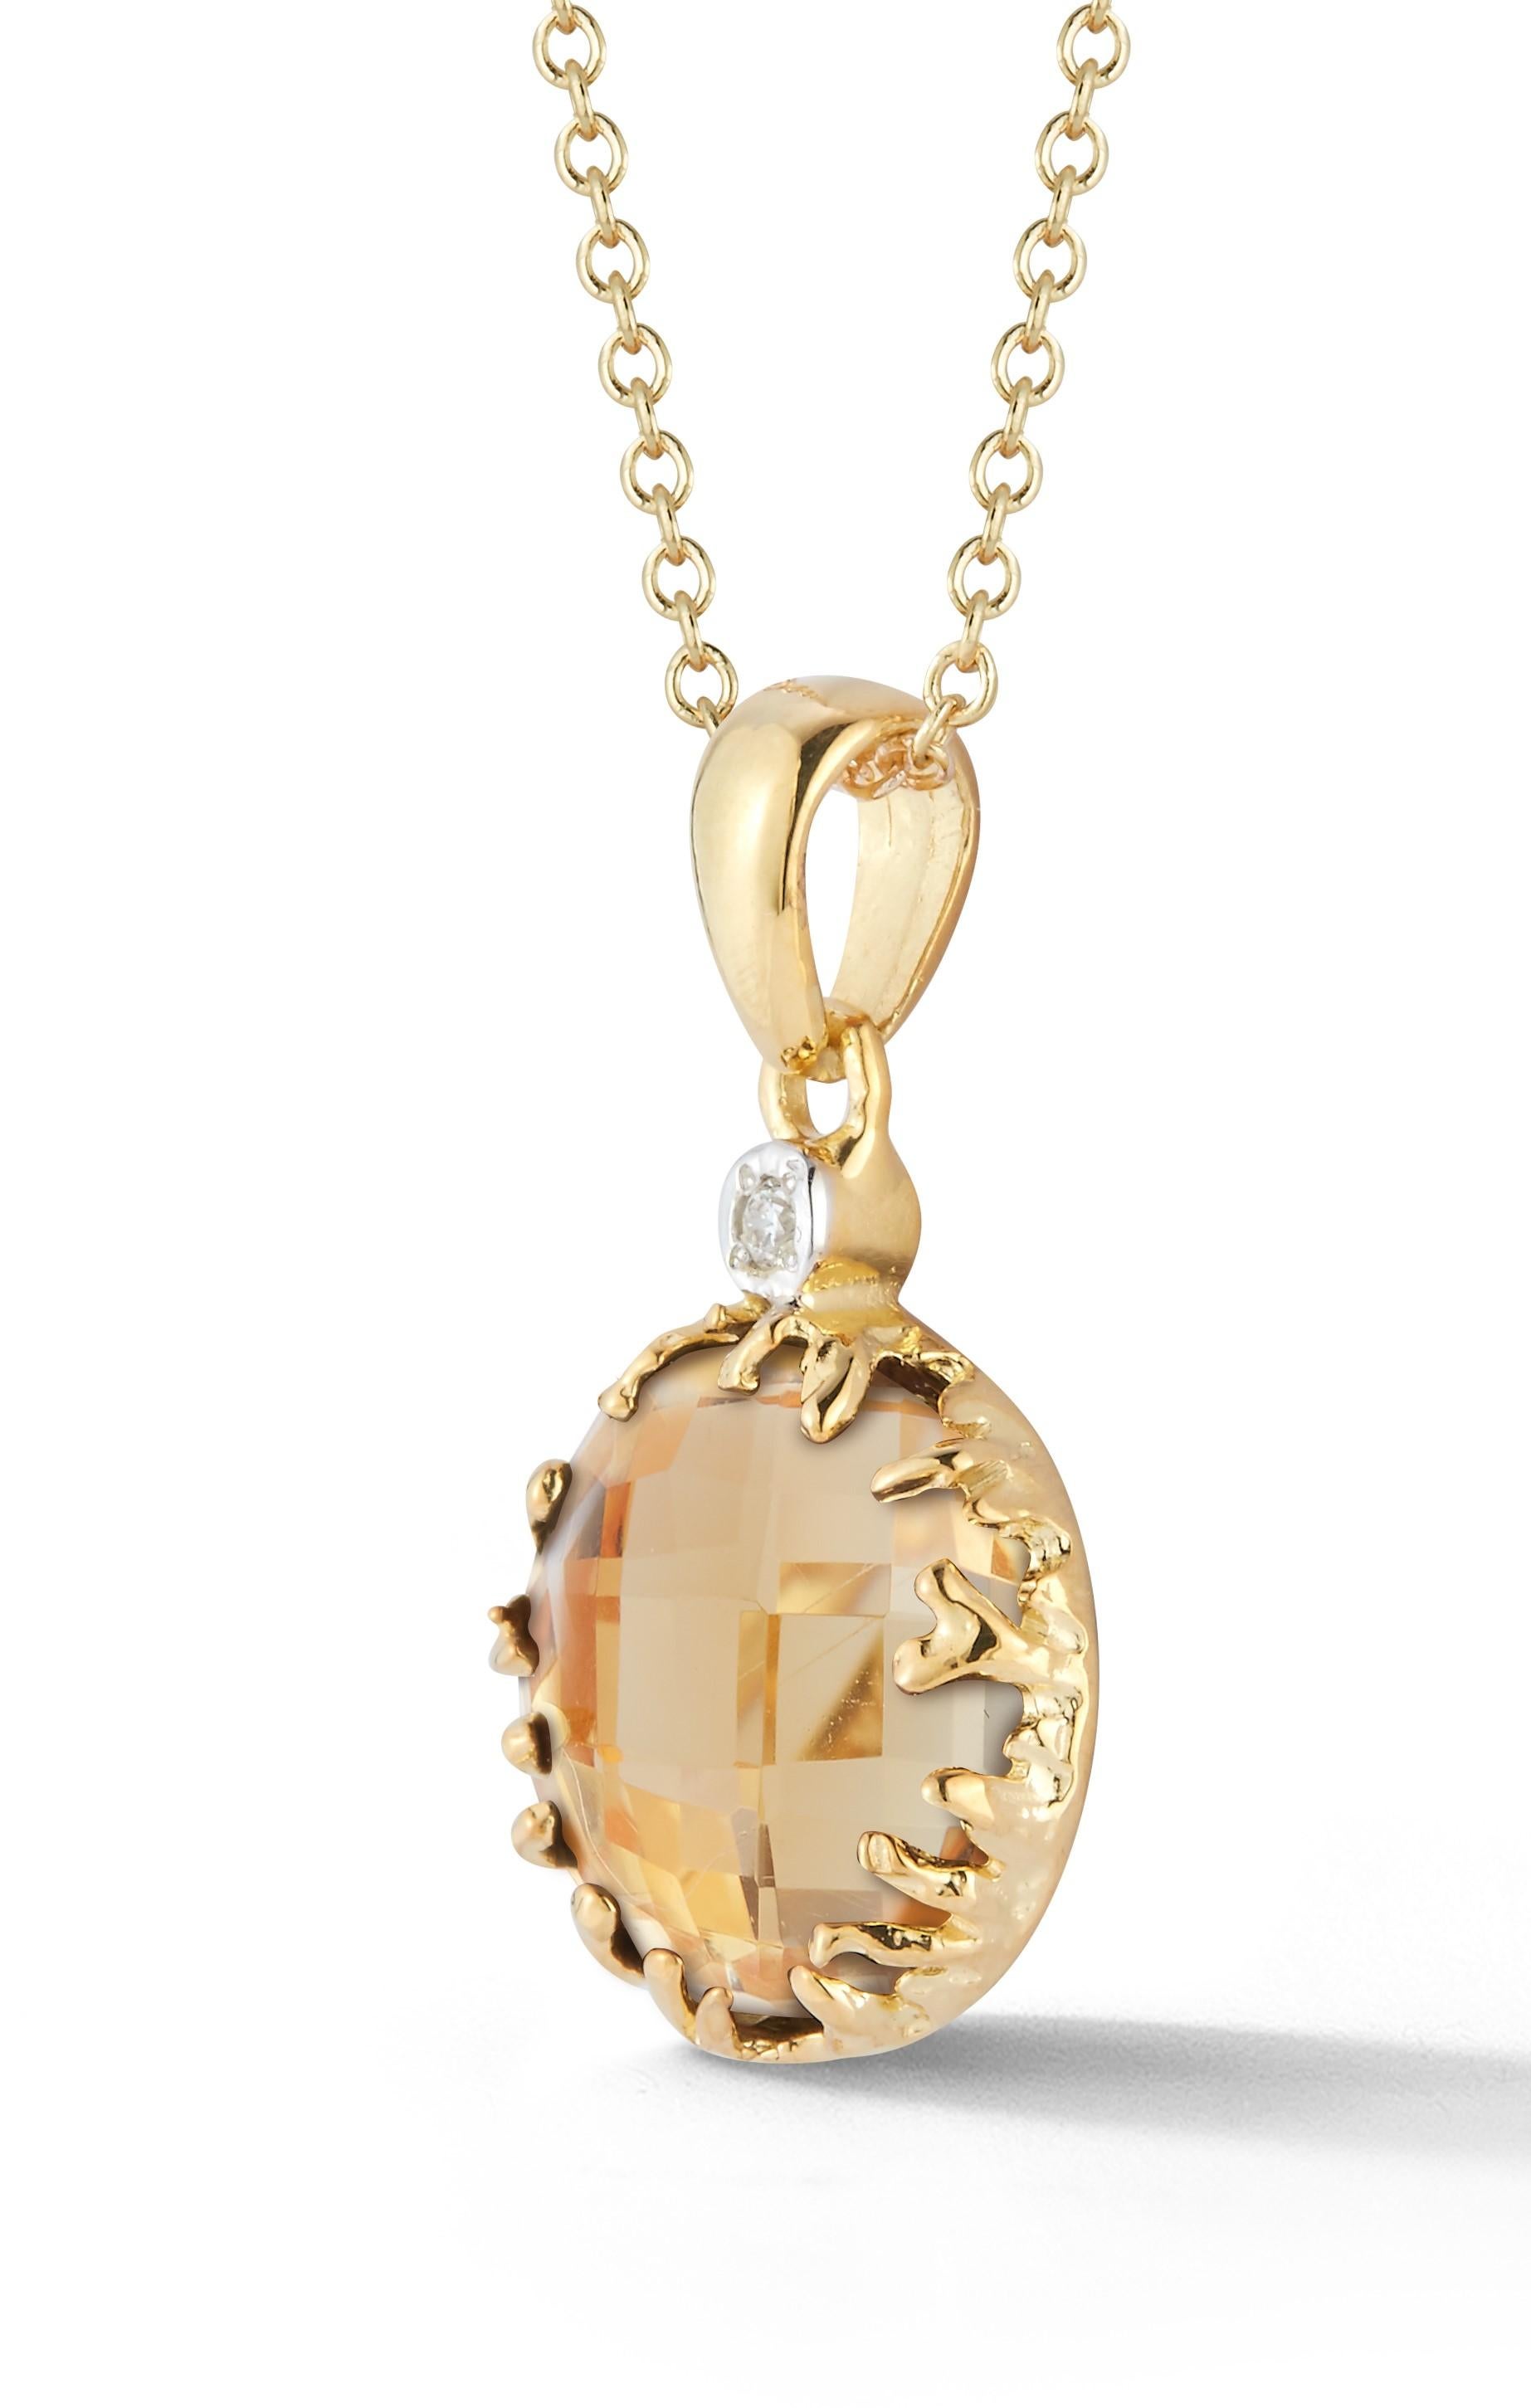 Round Cut Handcrafted 14k Yellow Gold 3.35 Carat Citrine Color Stone Pendant For Sale